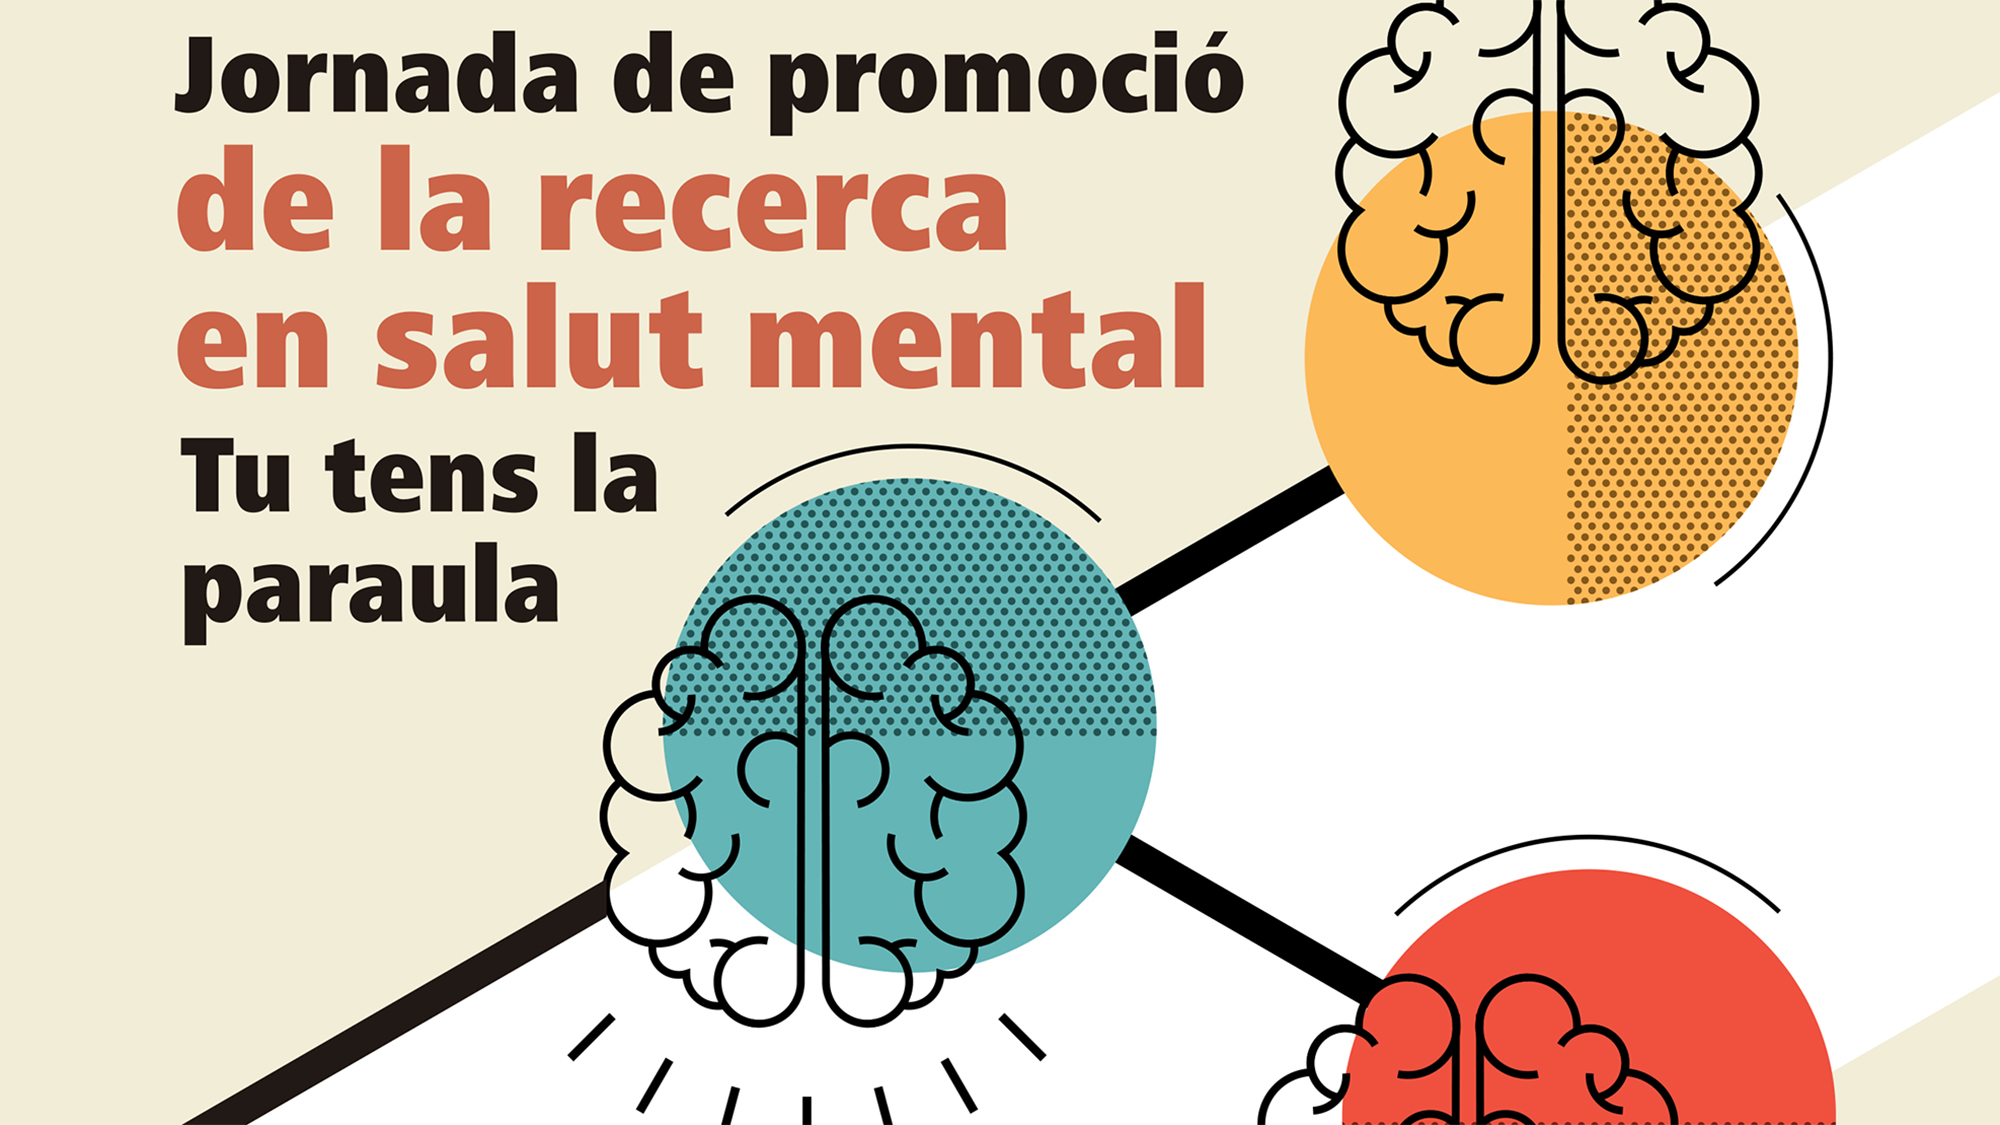 Detail of the poster of the day to promote mental health research. By Hospital del Mar.